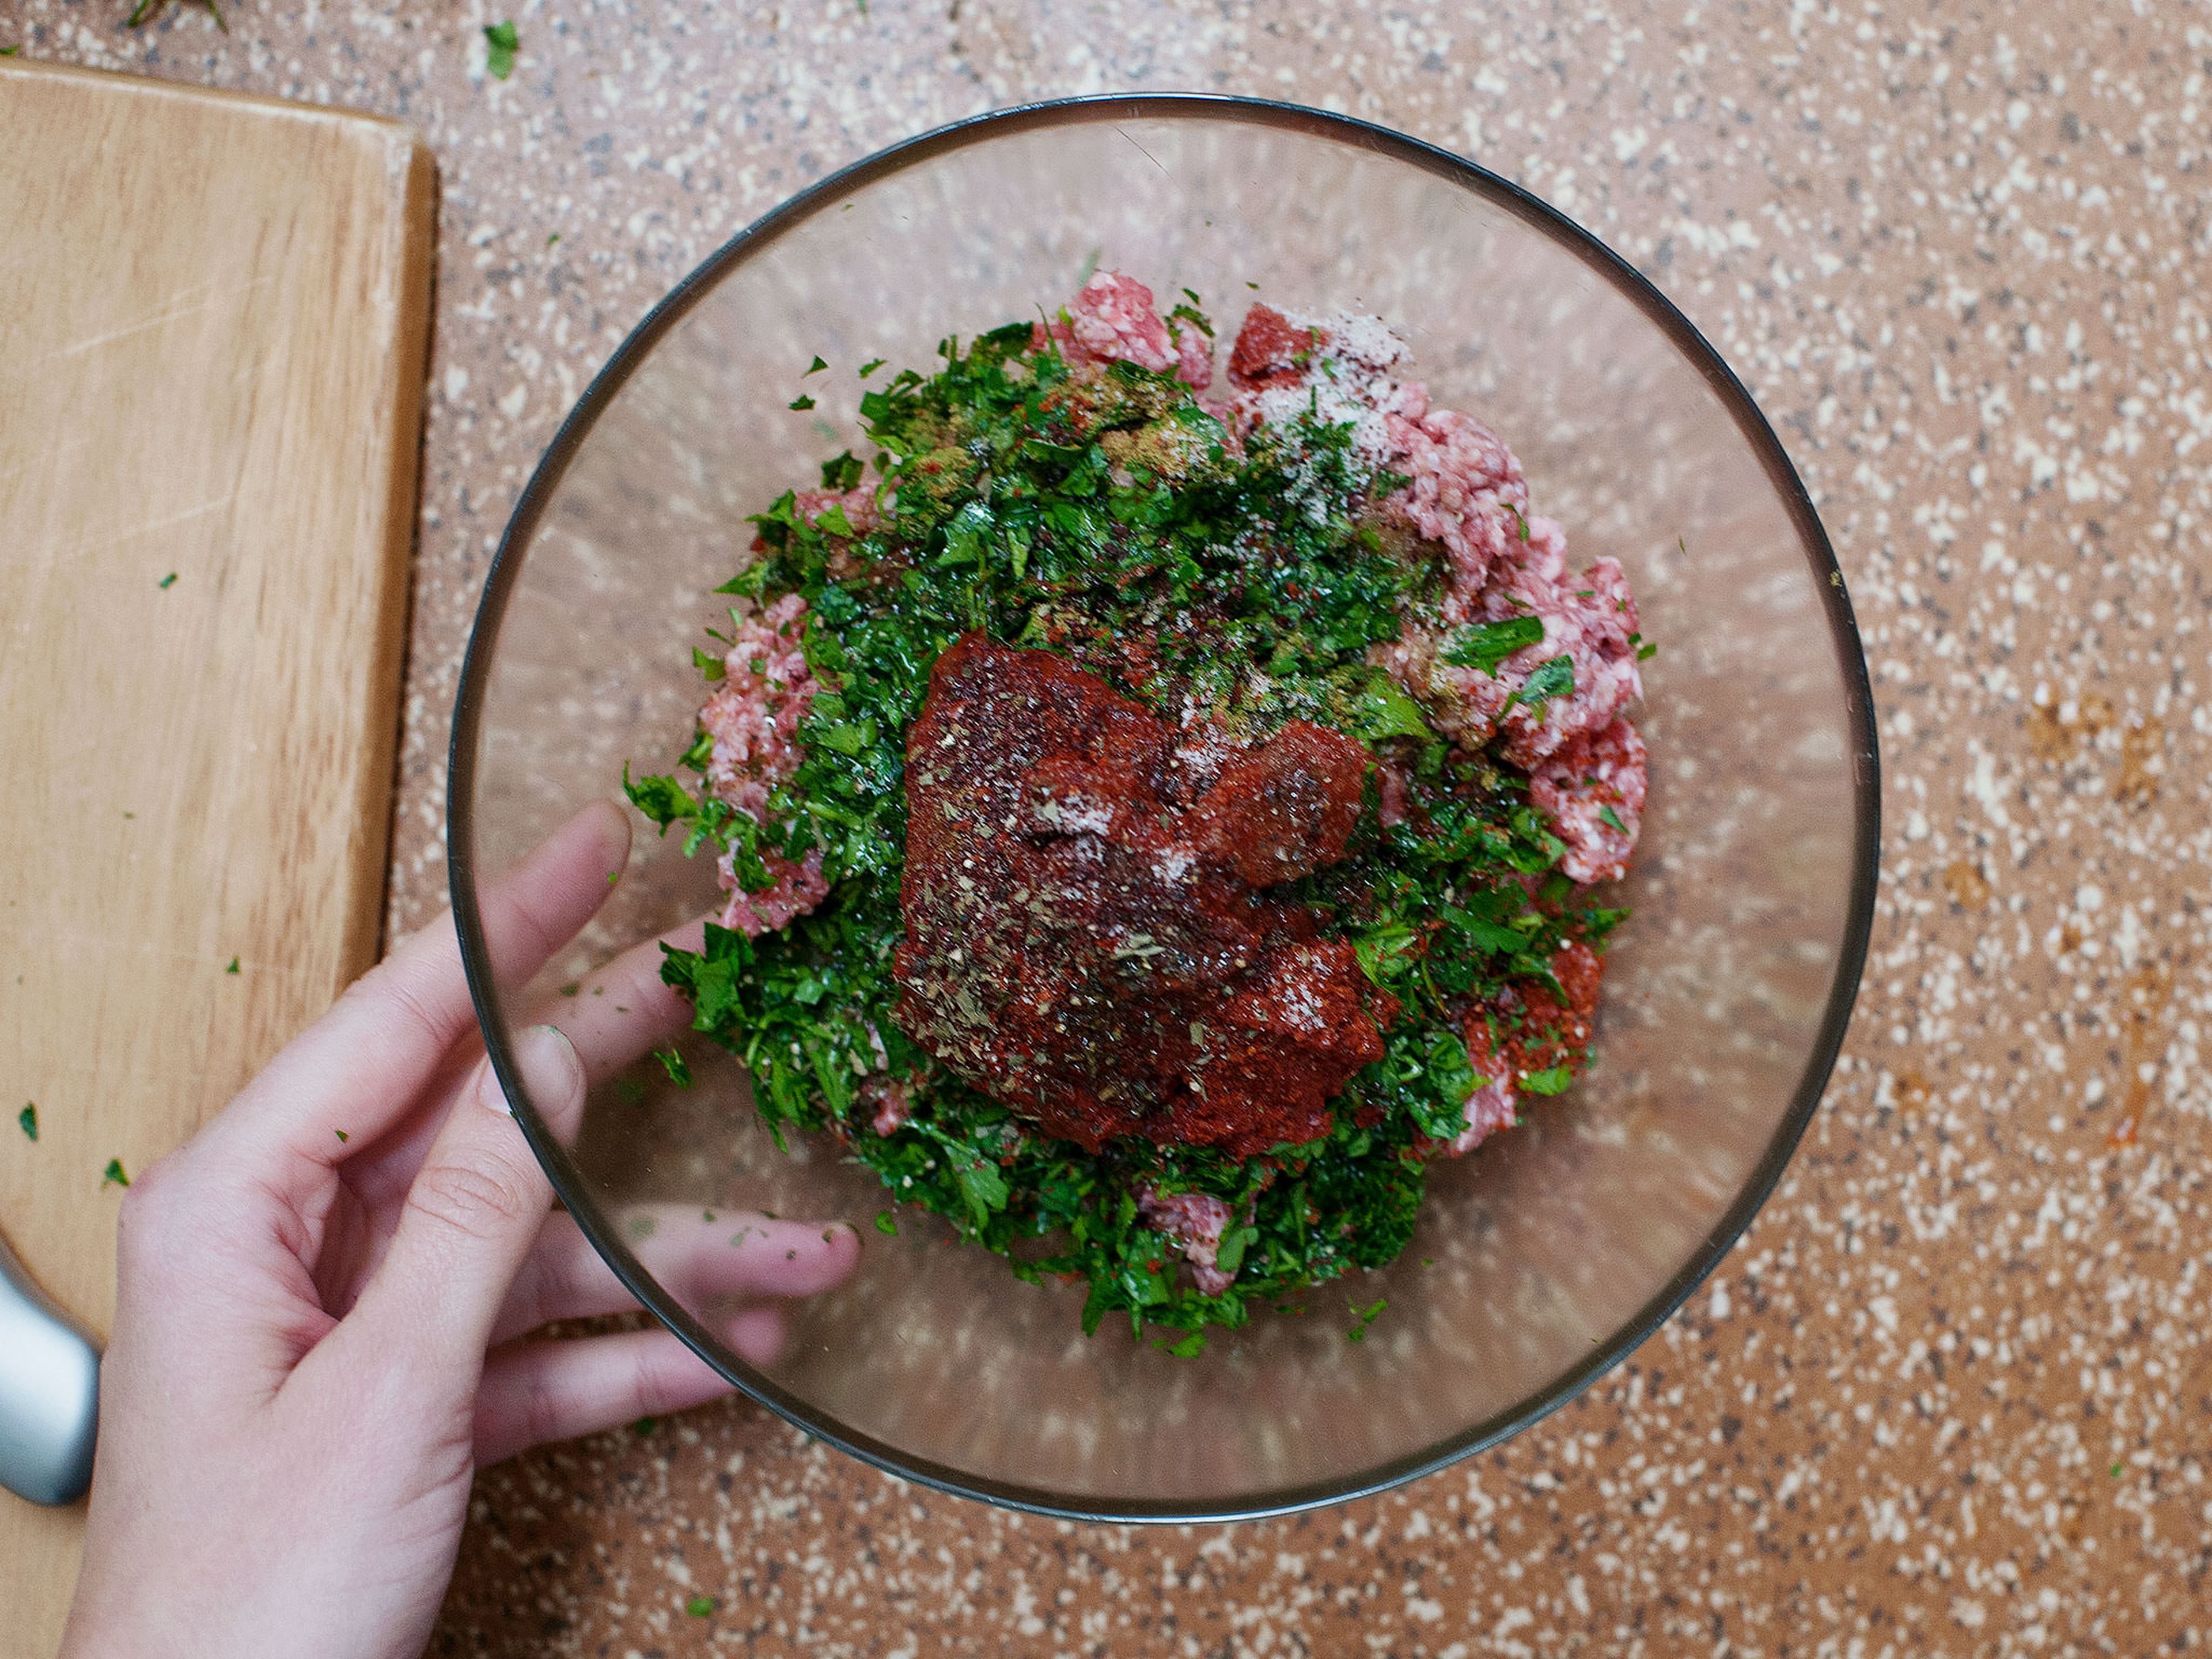 Finely chop flat leave parsley. Set half of it aside for garnish. In a large bowl, mix together minced lamb, diced tomatoes, half of the chopped parsley, tomato paste, garlic powder, garlic oil, crushed chili flakes, and cumin. Season with salt and pepper.